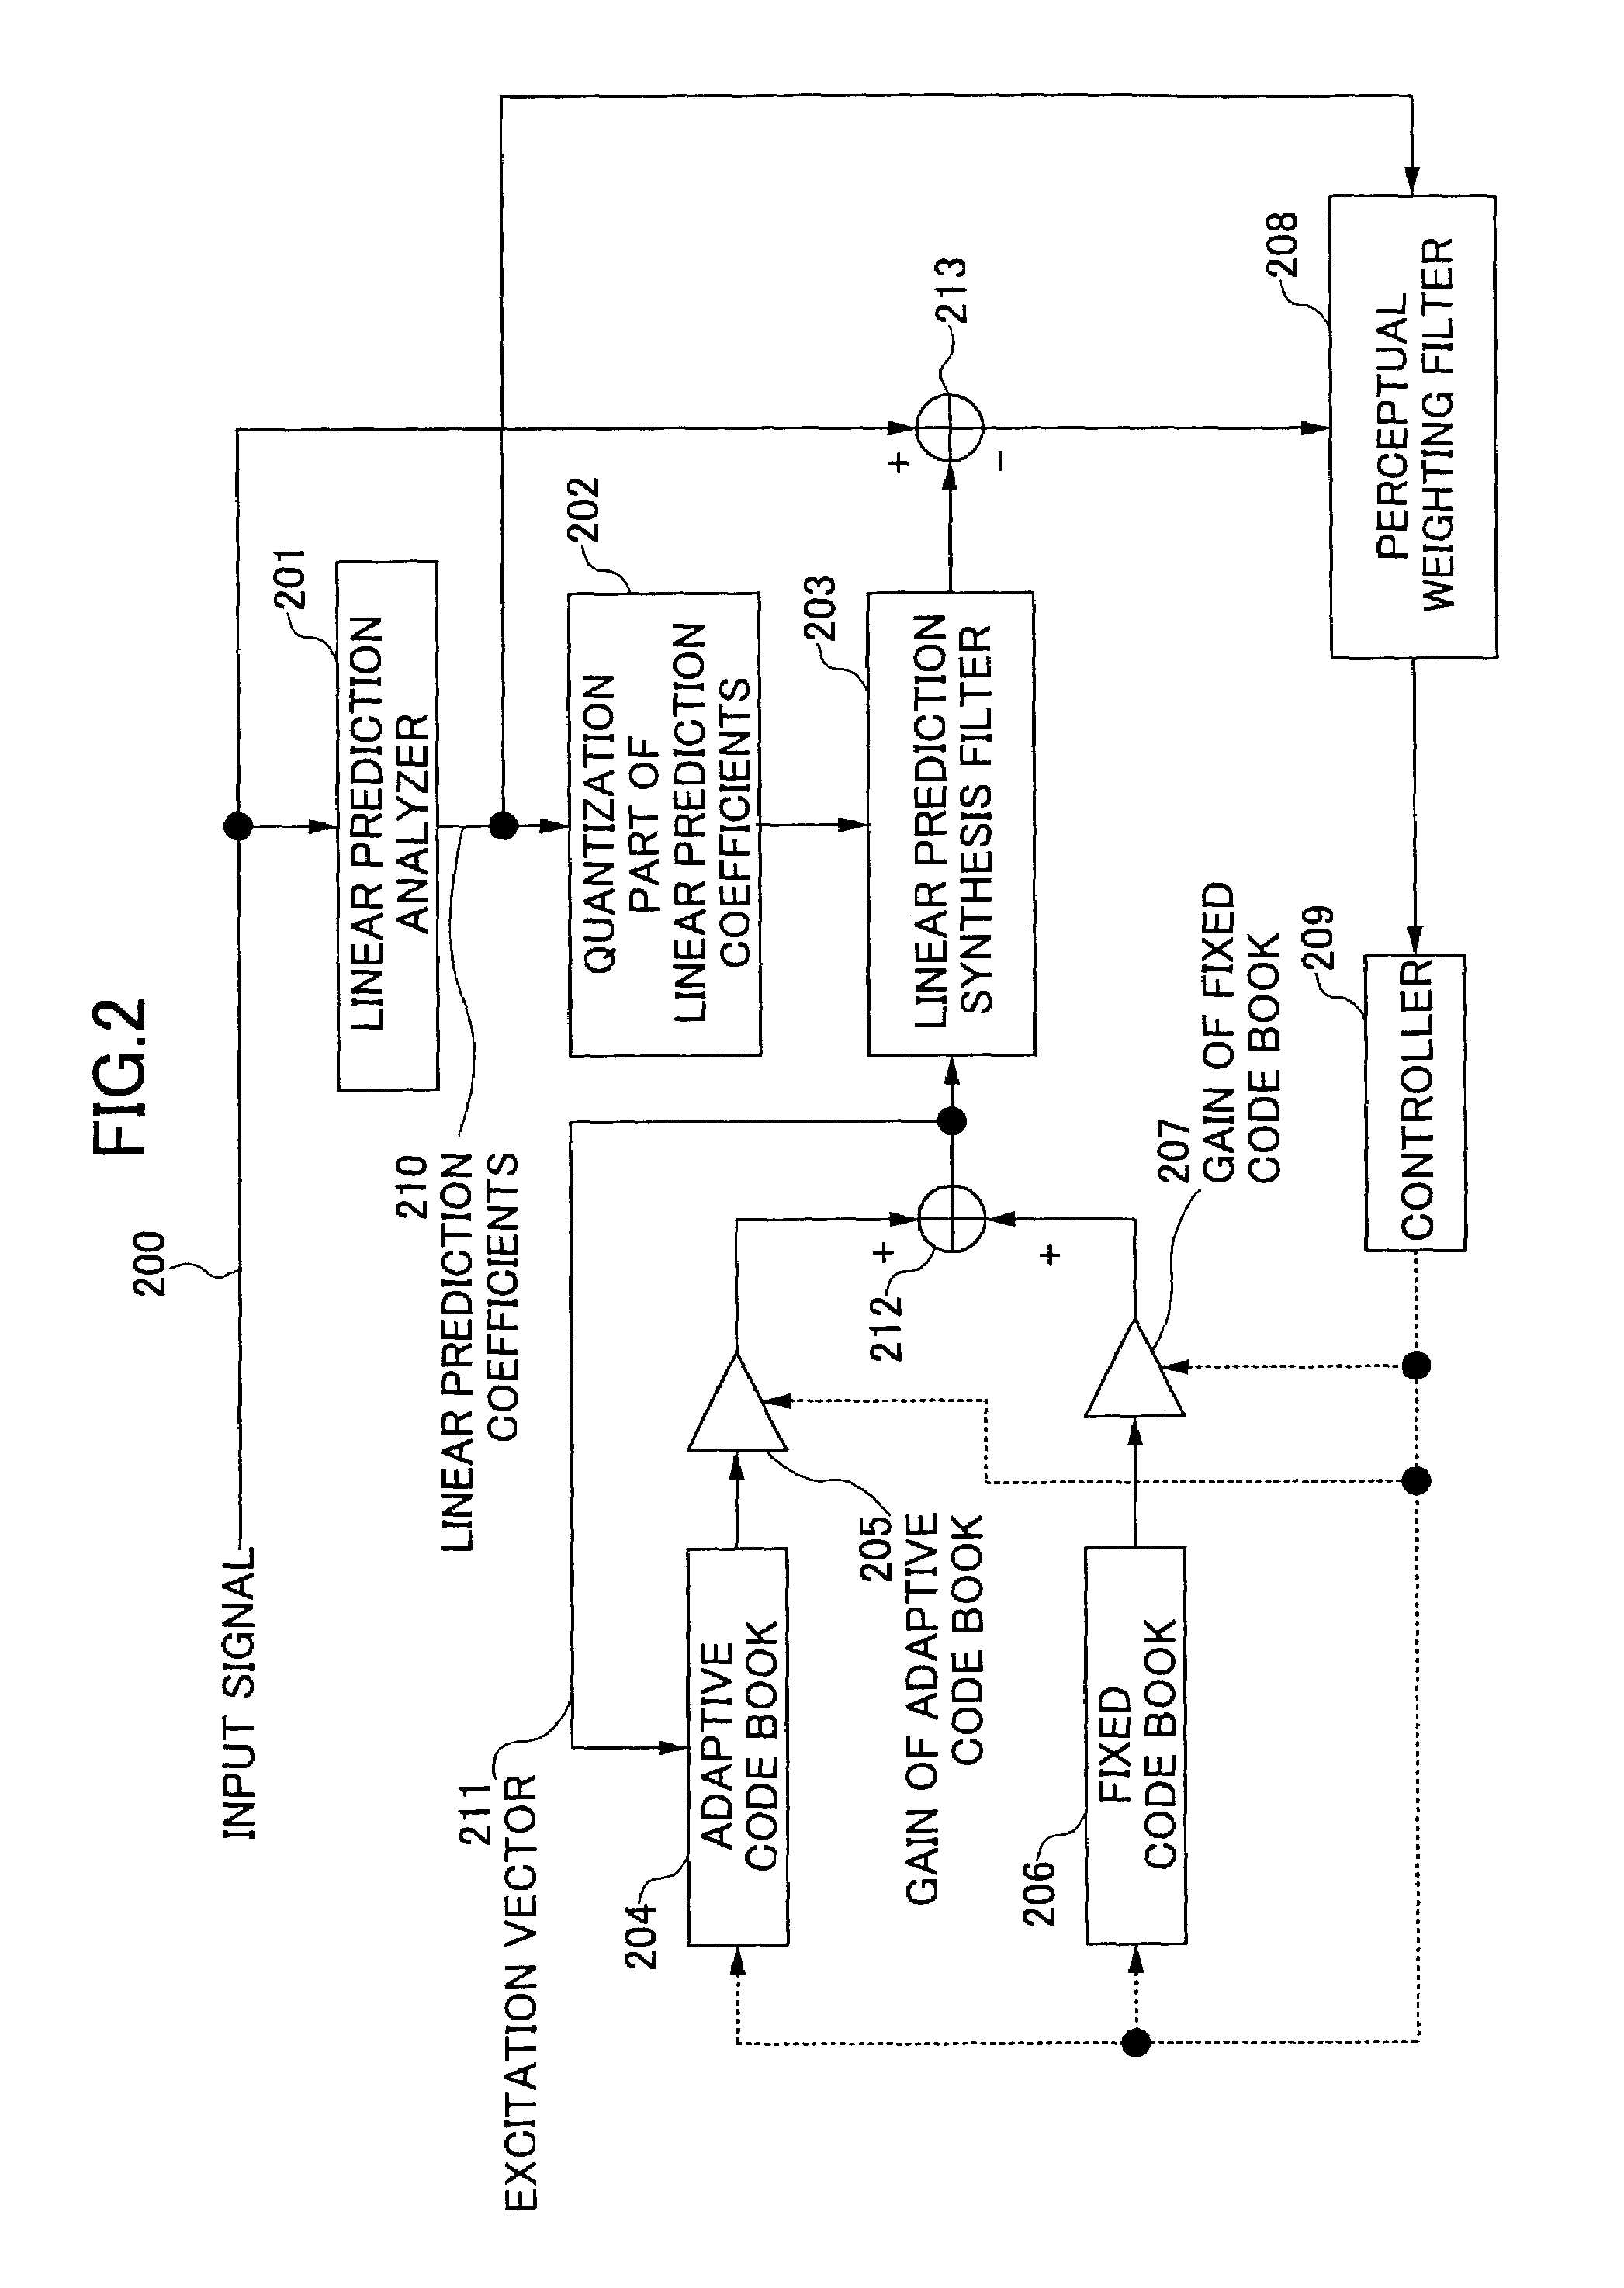 Encoding and decoding method and apparatus using rising-transition detection and notification